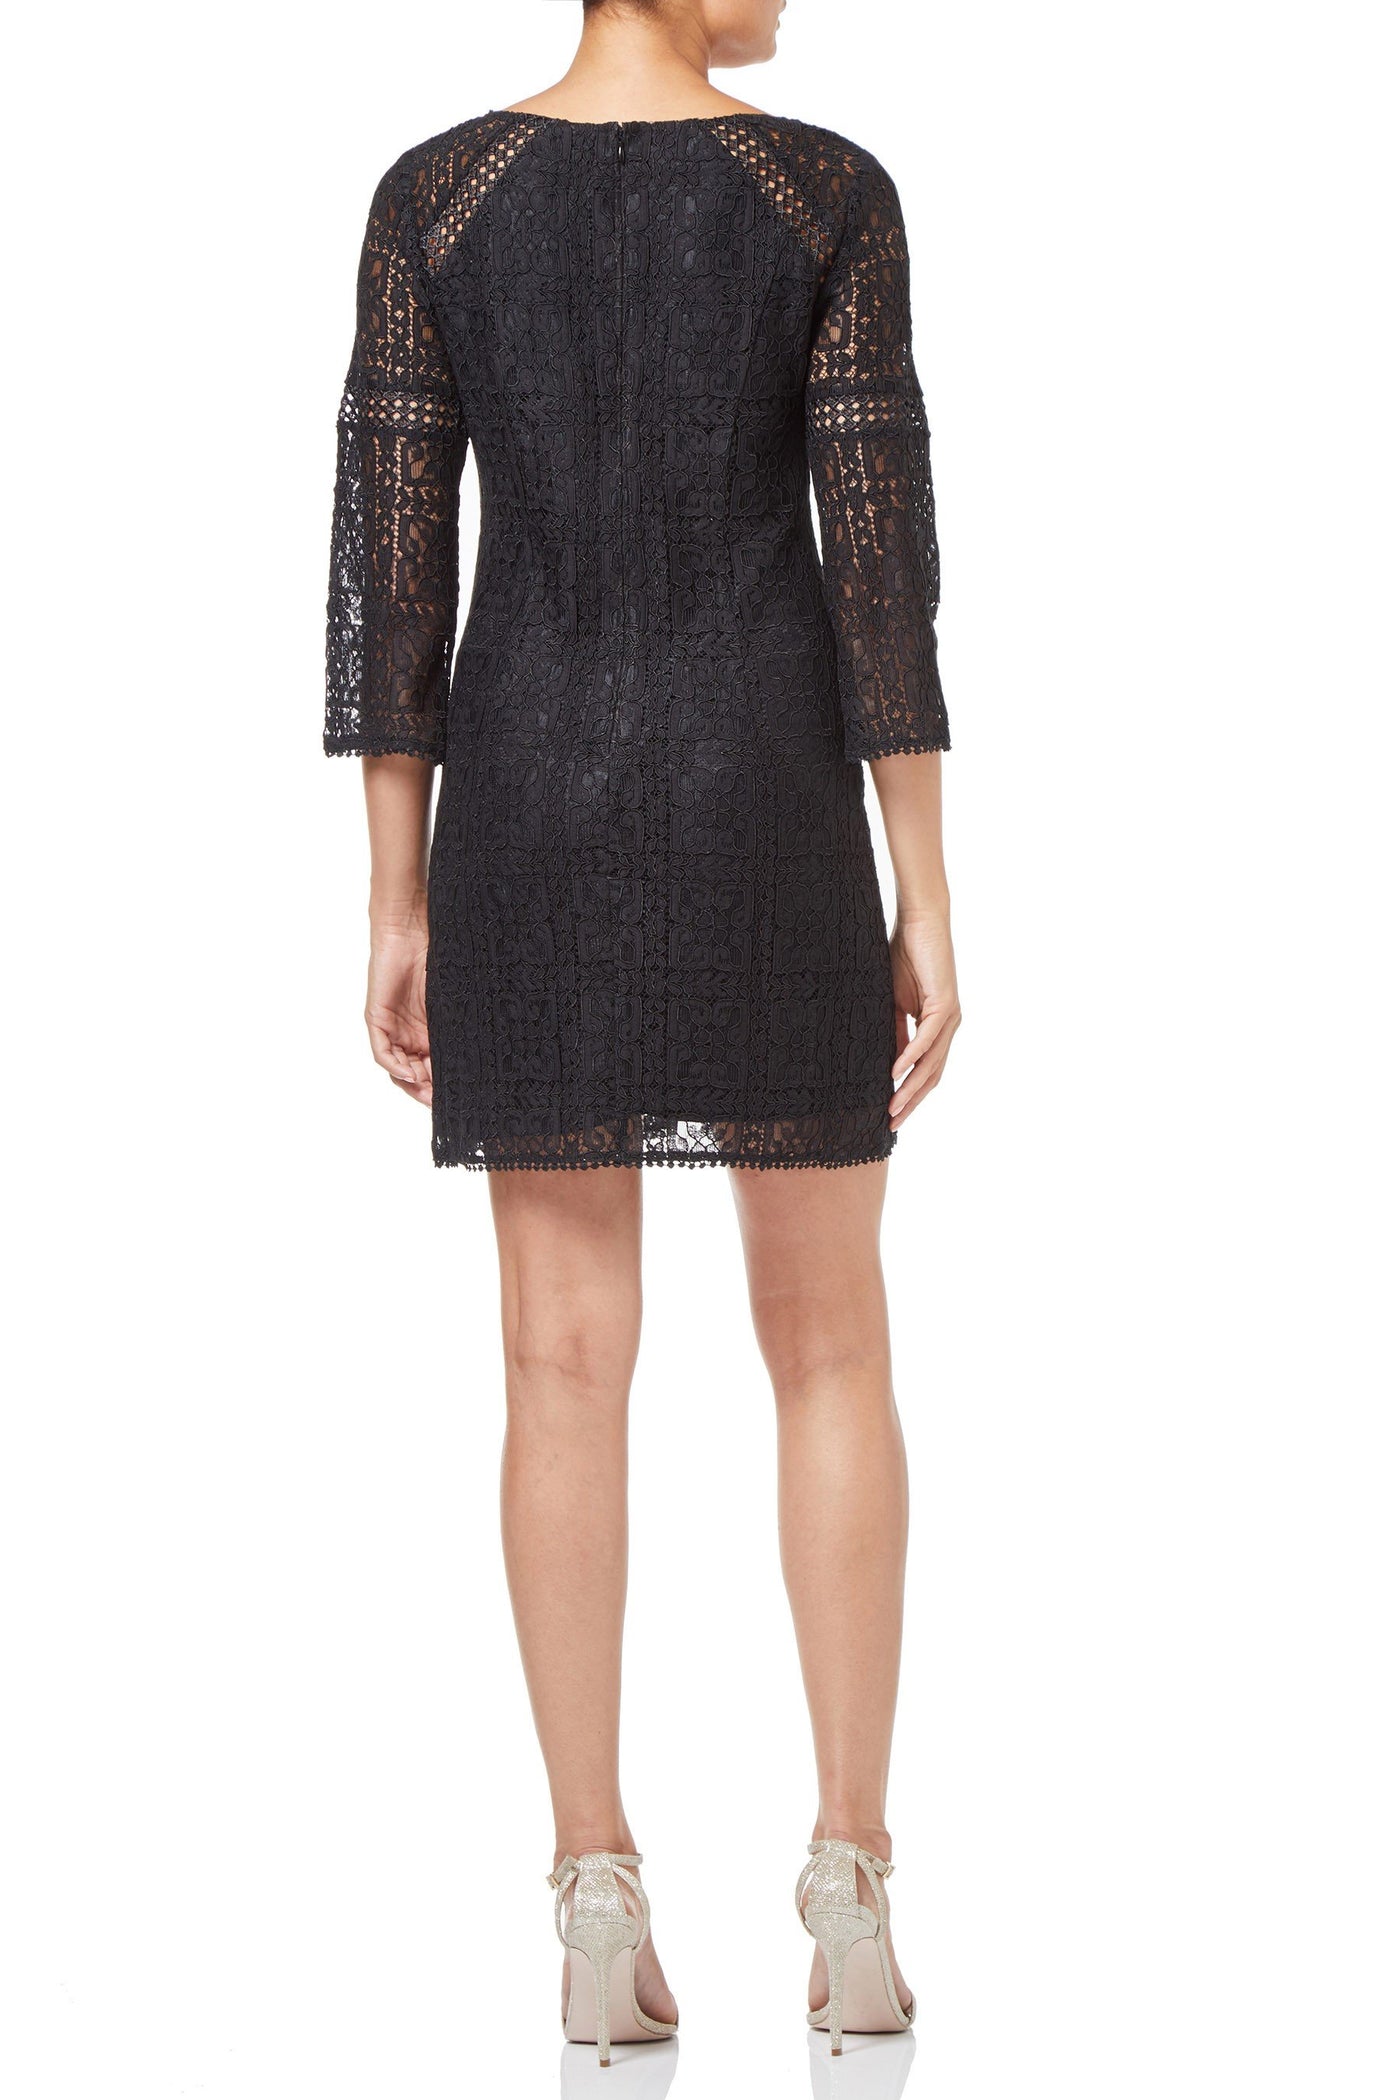 Adrianna Papell - AP1D102465 Quarter Length Sleeve Lace Shift Dress In Black